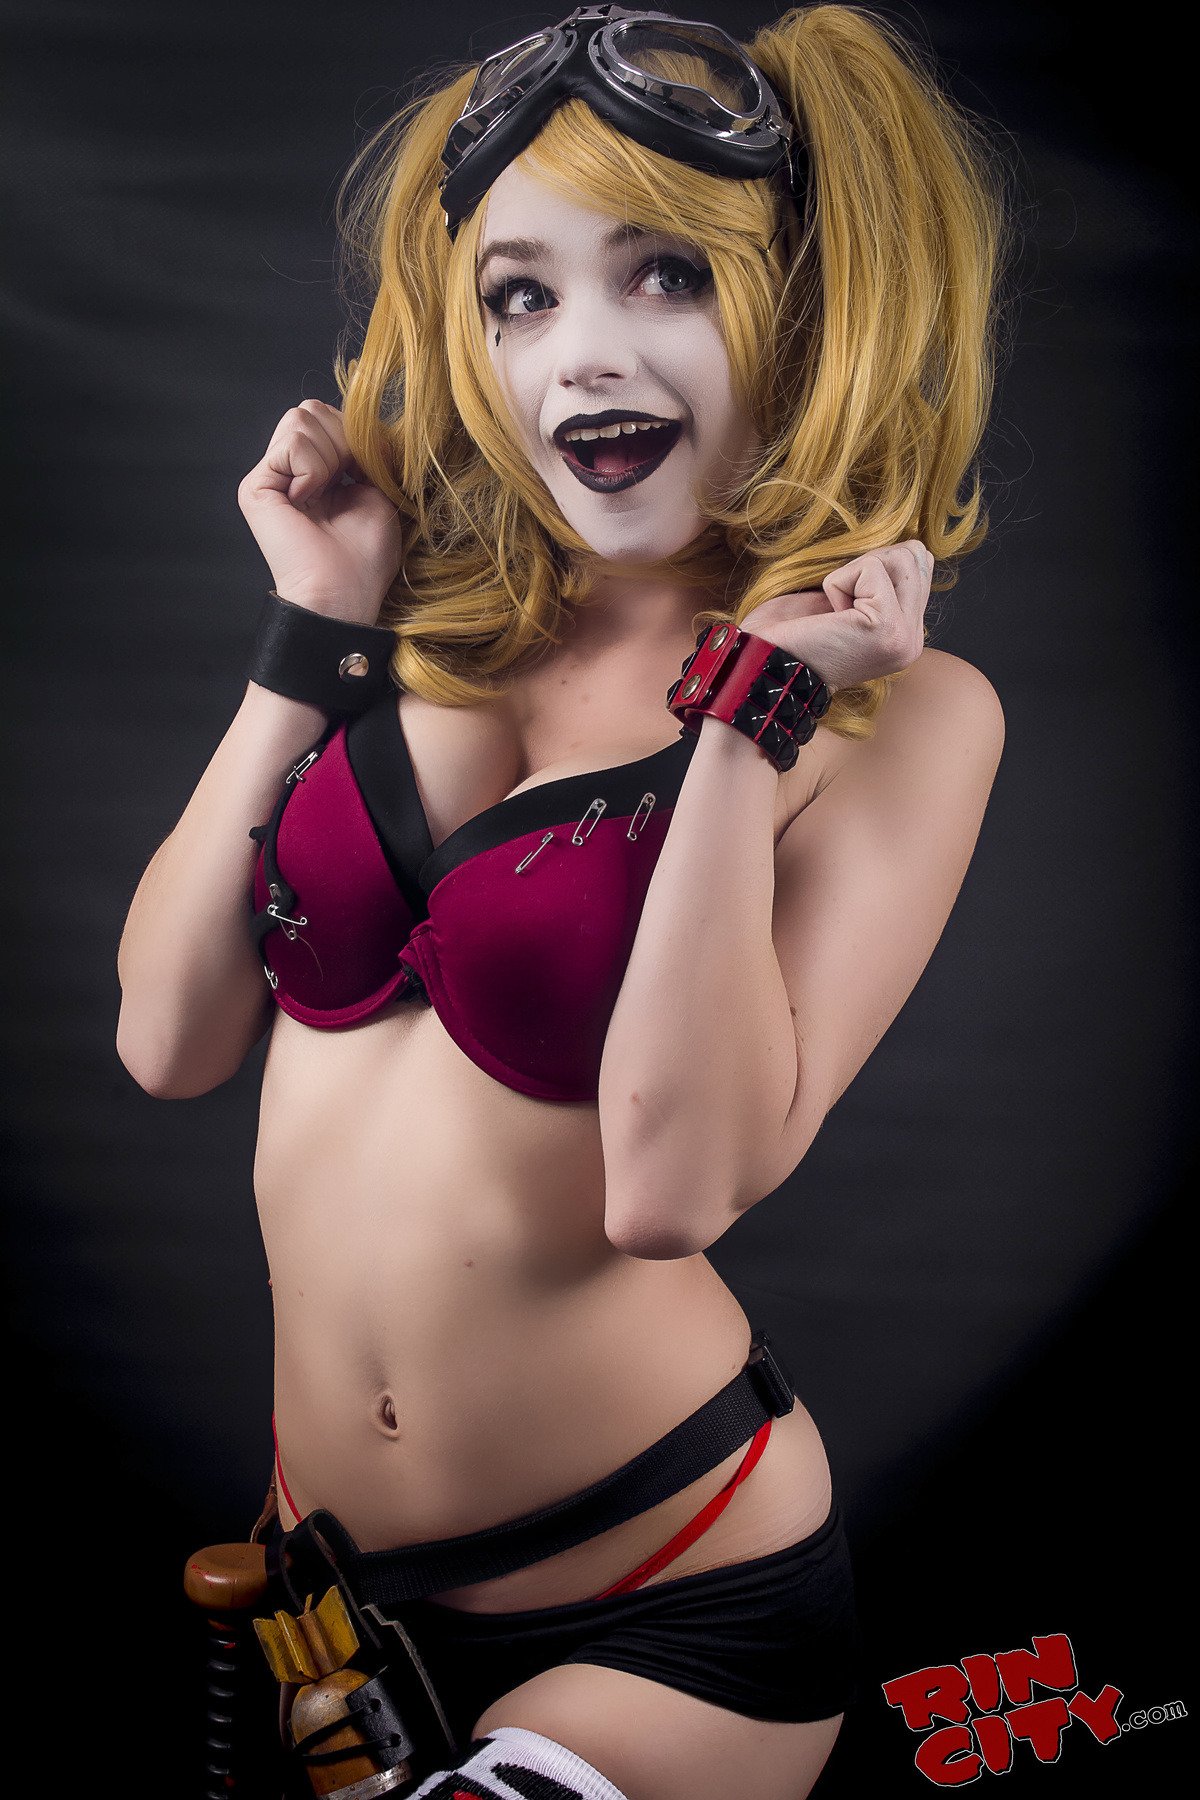 Photo by polymorphousperv with the username @polymorphousperv,  December 16, 2018 at 7:46 PM. The post is about the topic Cosplay and the text says 'Rin City - Harley Quinn Cosplay'